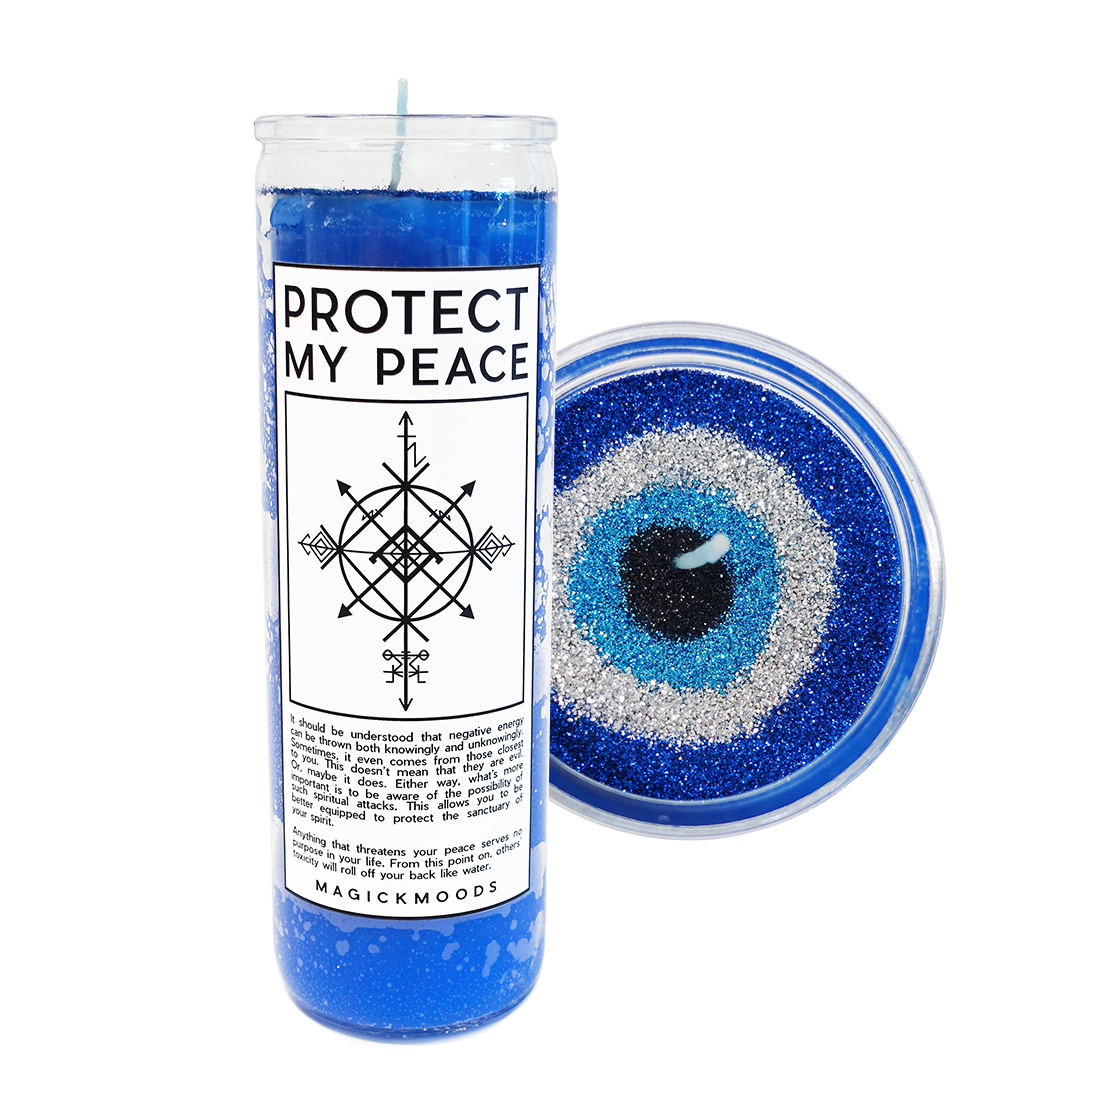 Protect My Peace 7-Day Meditation Candle - PREORDER- Ships by July 28th, 2023